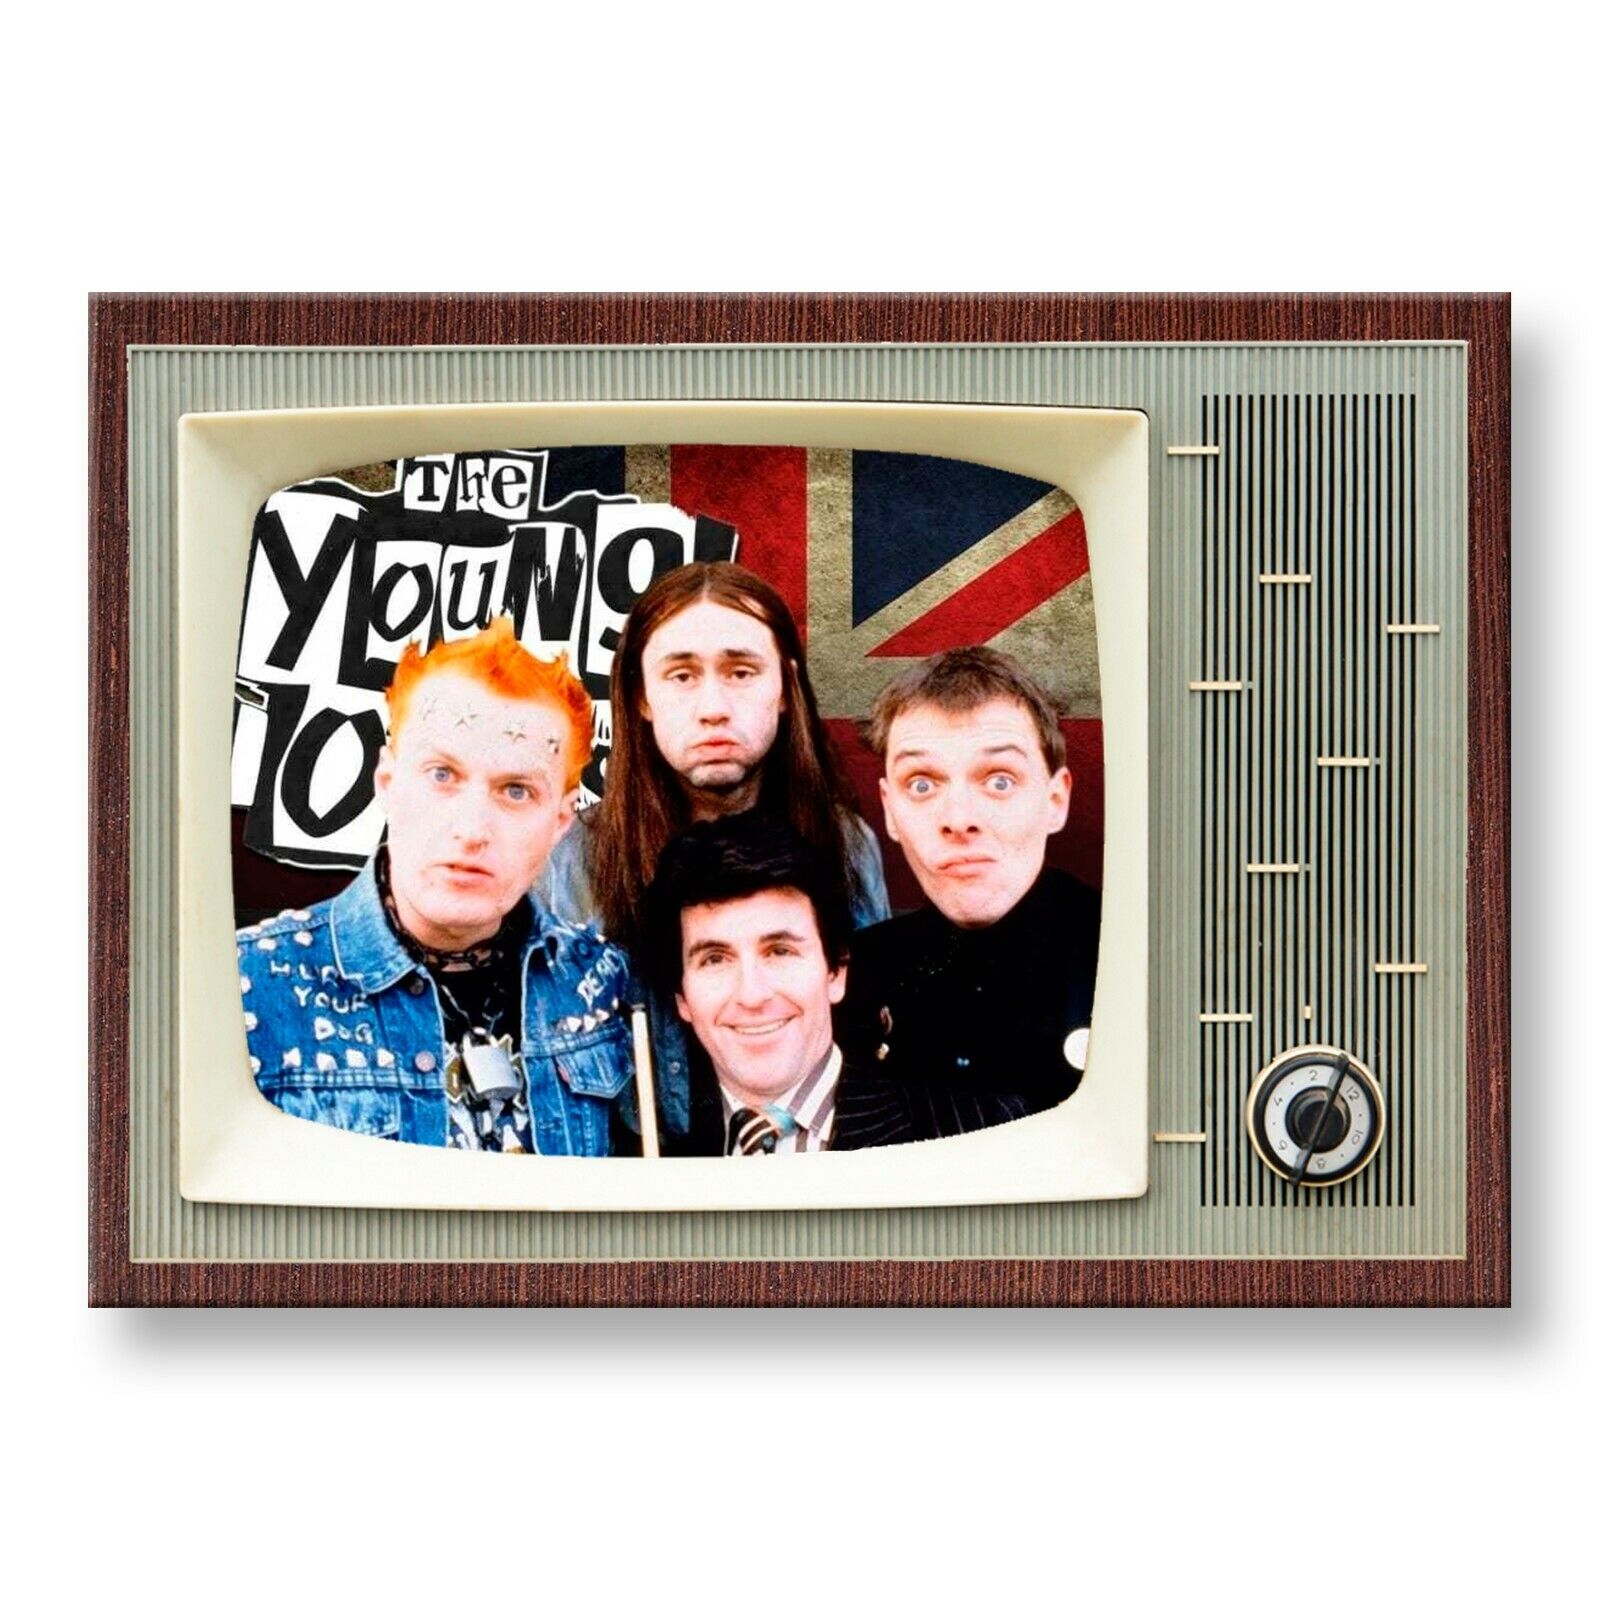 THE YOUNG ONES Classic TV 3.5 inches x 2.5 inches Steel Cased FRIDGE MAGNET